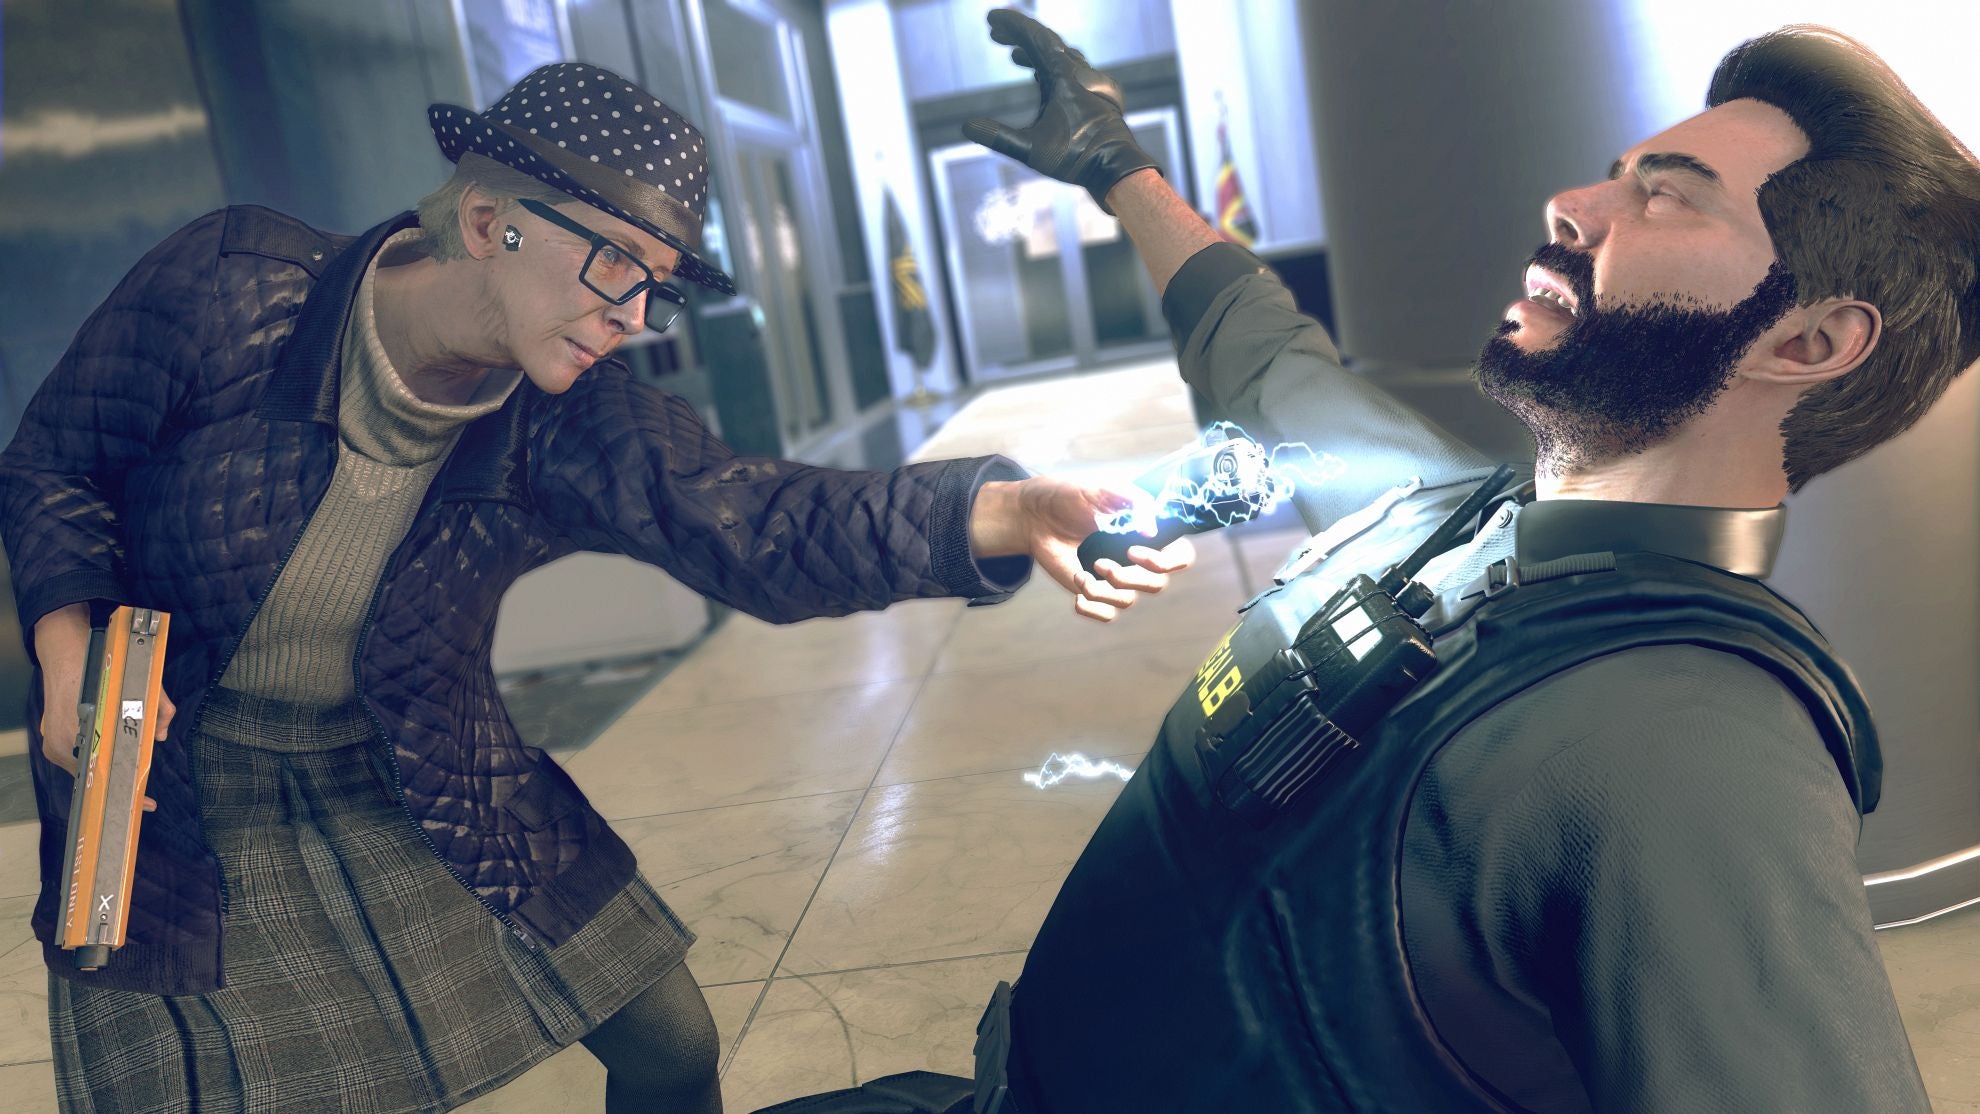 Image for Watch a grandma taze a security guard in 11-minute Watch Dogs: Legion gameplay video